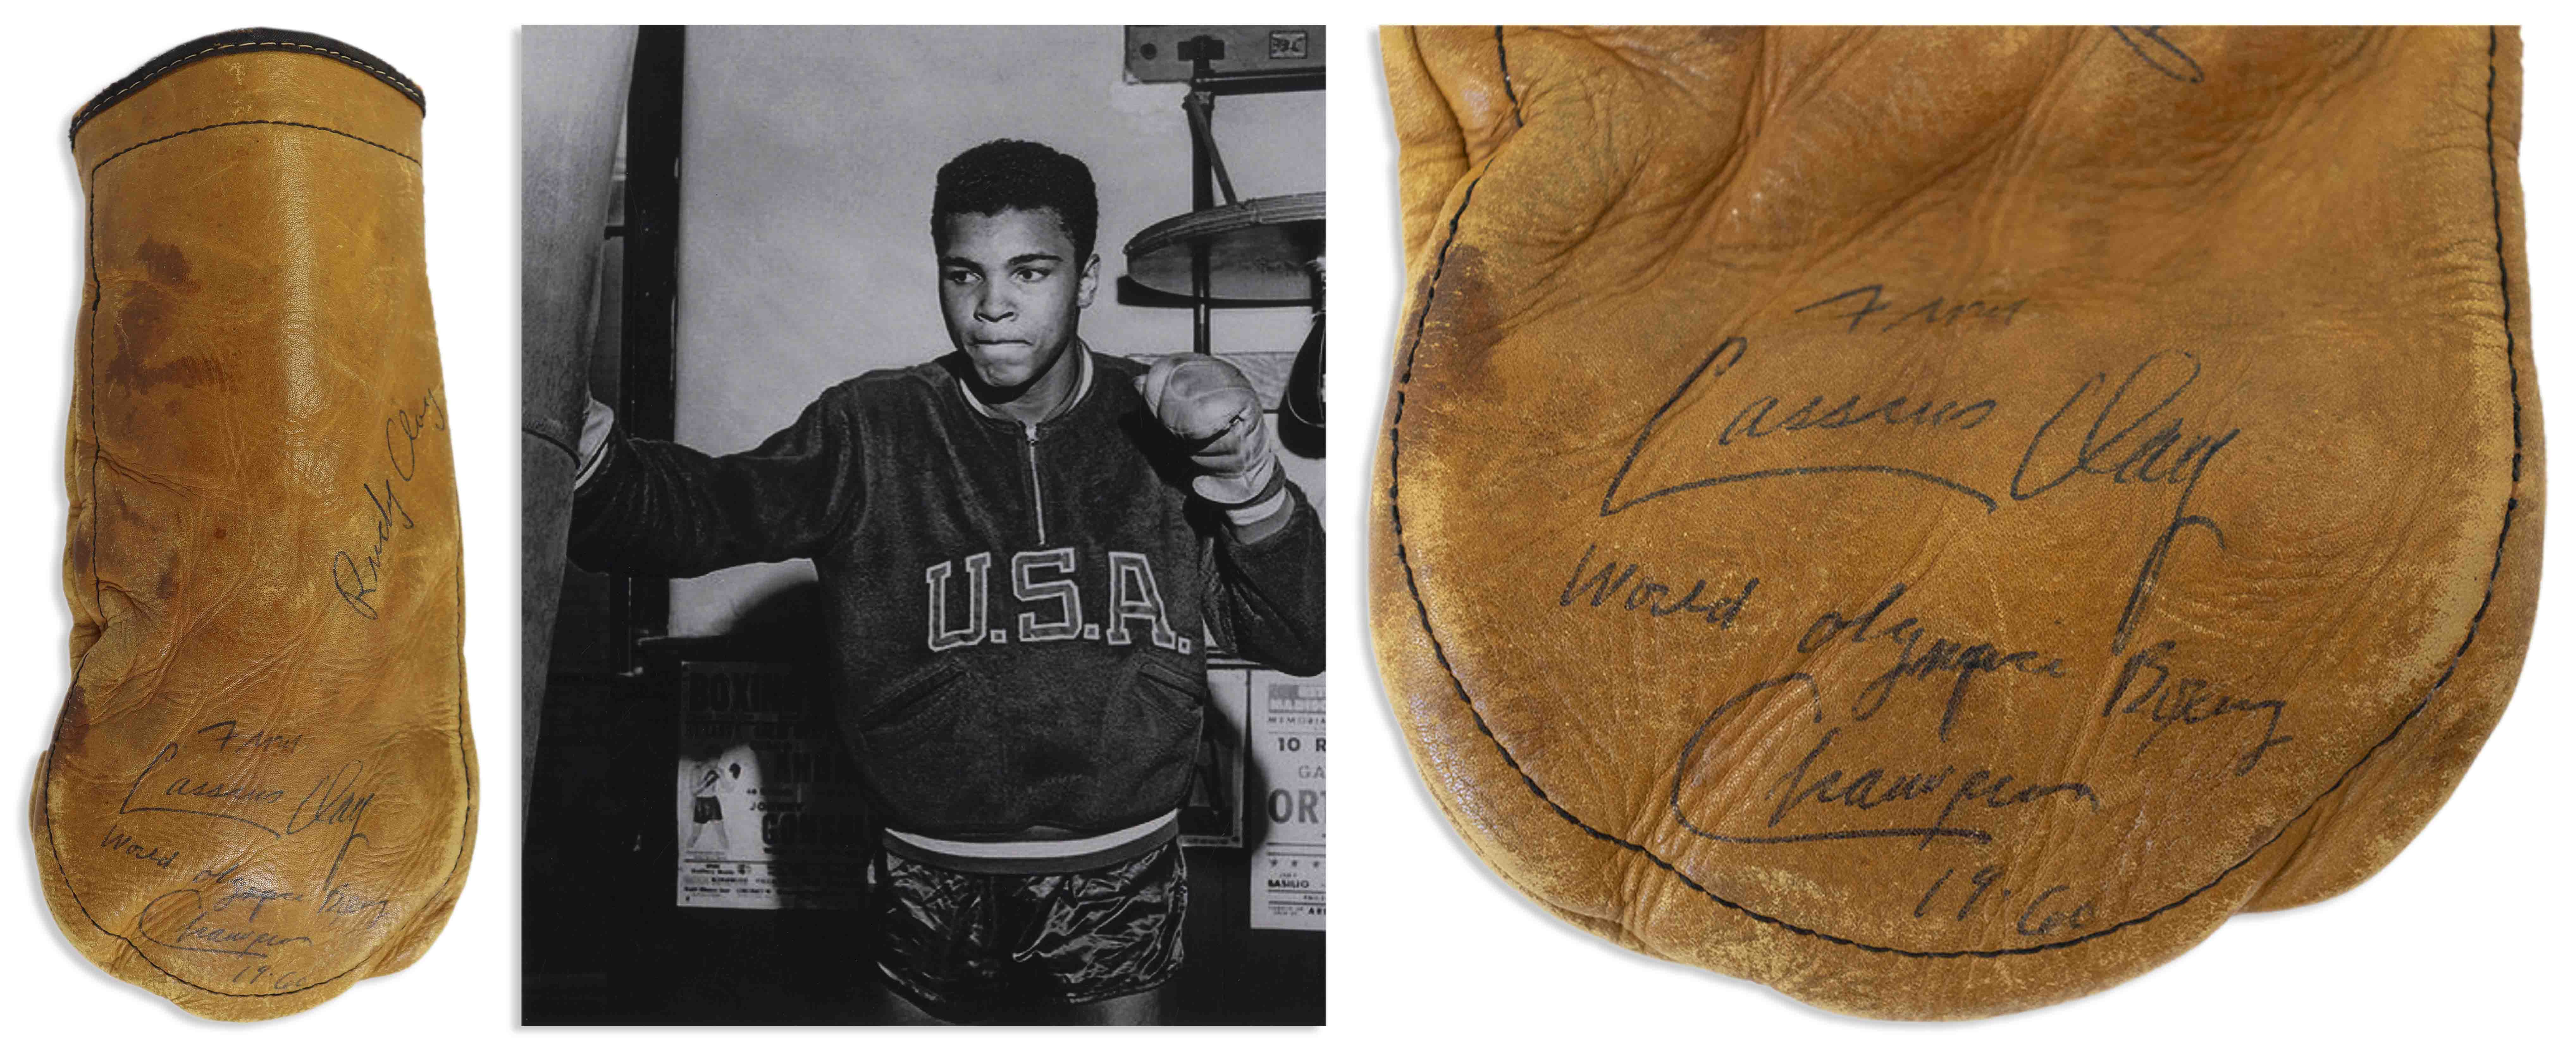 Muhammad Ali Hair Strand Lock Piece Speck Relic not signed Cassius Clay Boxing 